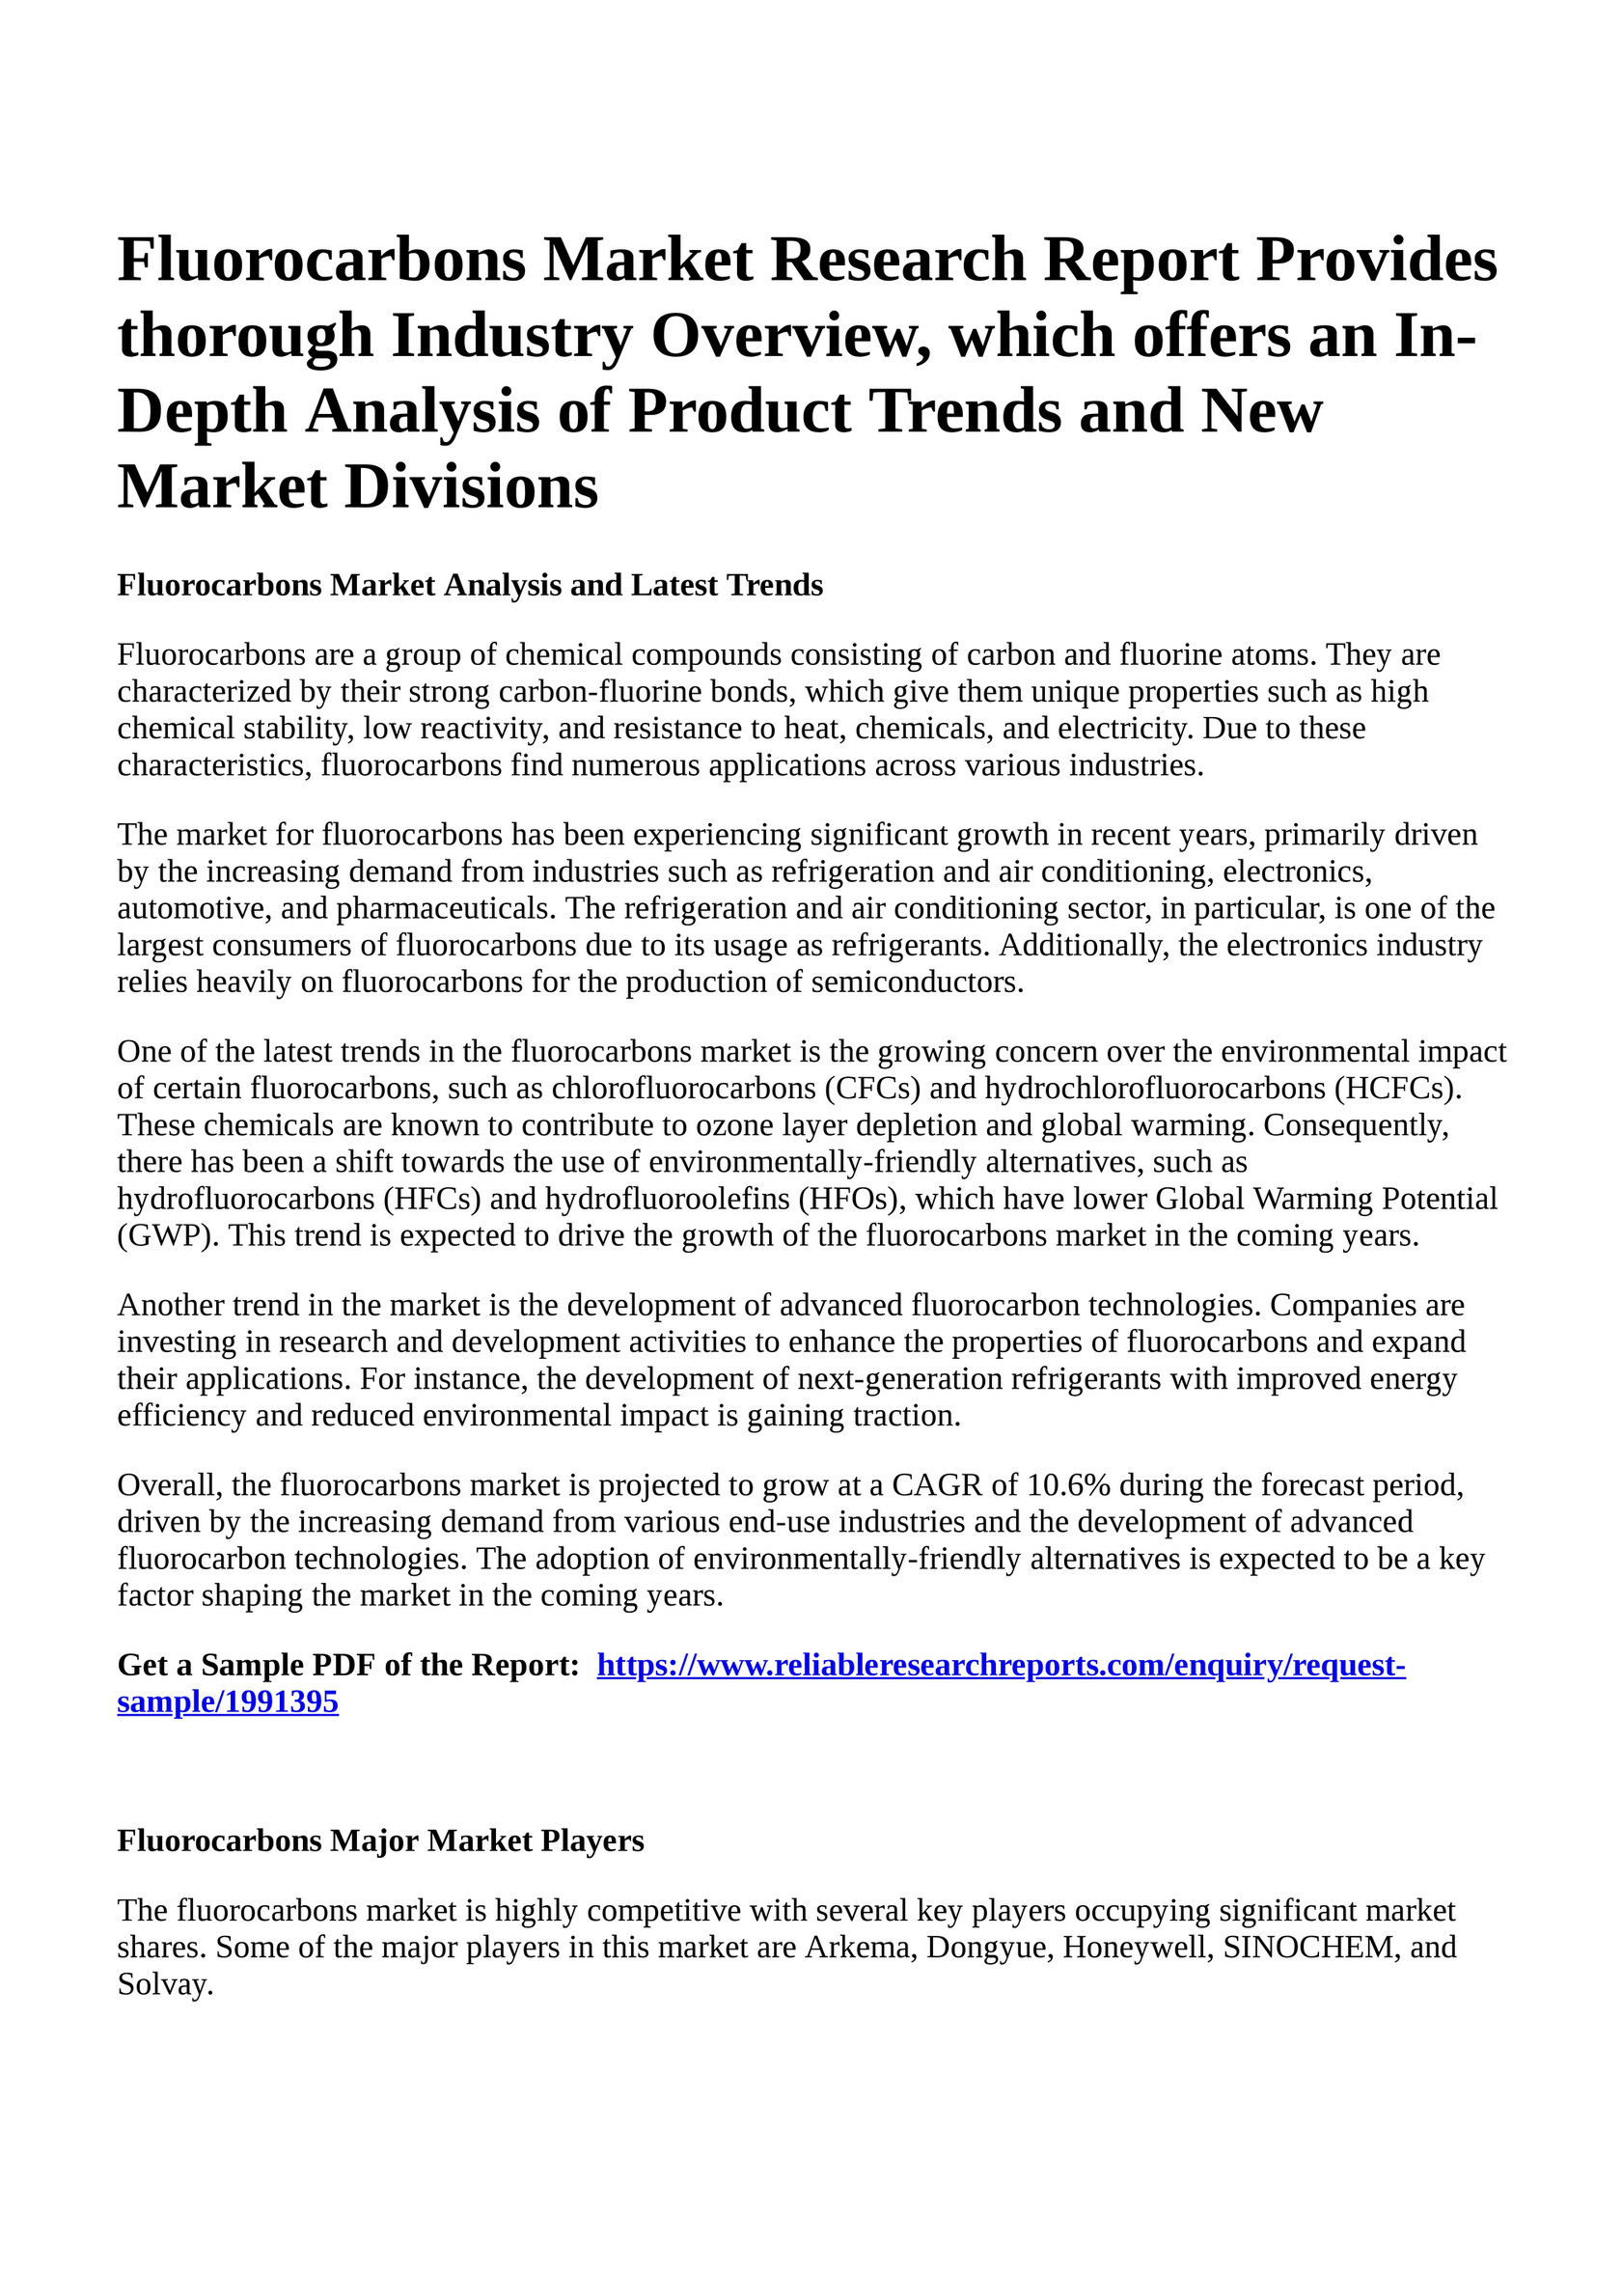 Reportprime - Fluorocarbons Market Research Report Provides thorough  Industry Overview, which offers an In-Depth Analysis of Product Trends and  New Market Divisions - Page 1